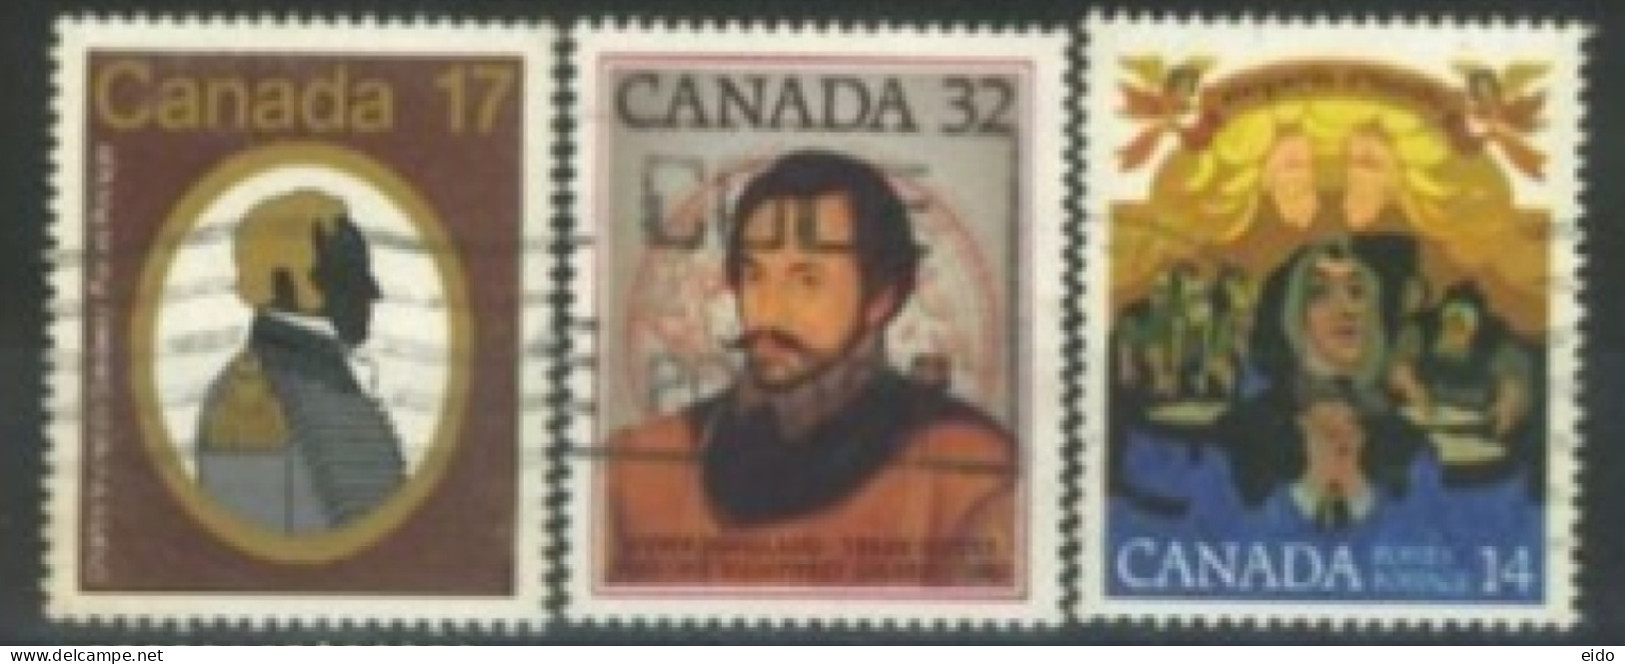 CANADA - 1978/83, MARGUERITE D'YOUVILLE COMMEMORATION, CHARLES MICHEL & SIR HUMPHREY. STAMPS SET OF 3, USED. - Usati